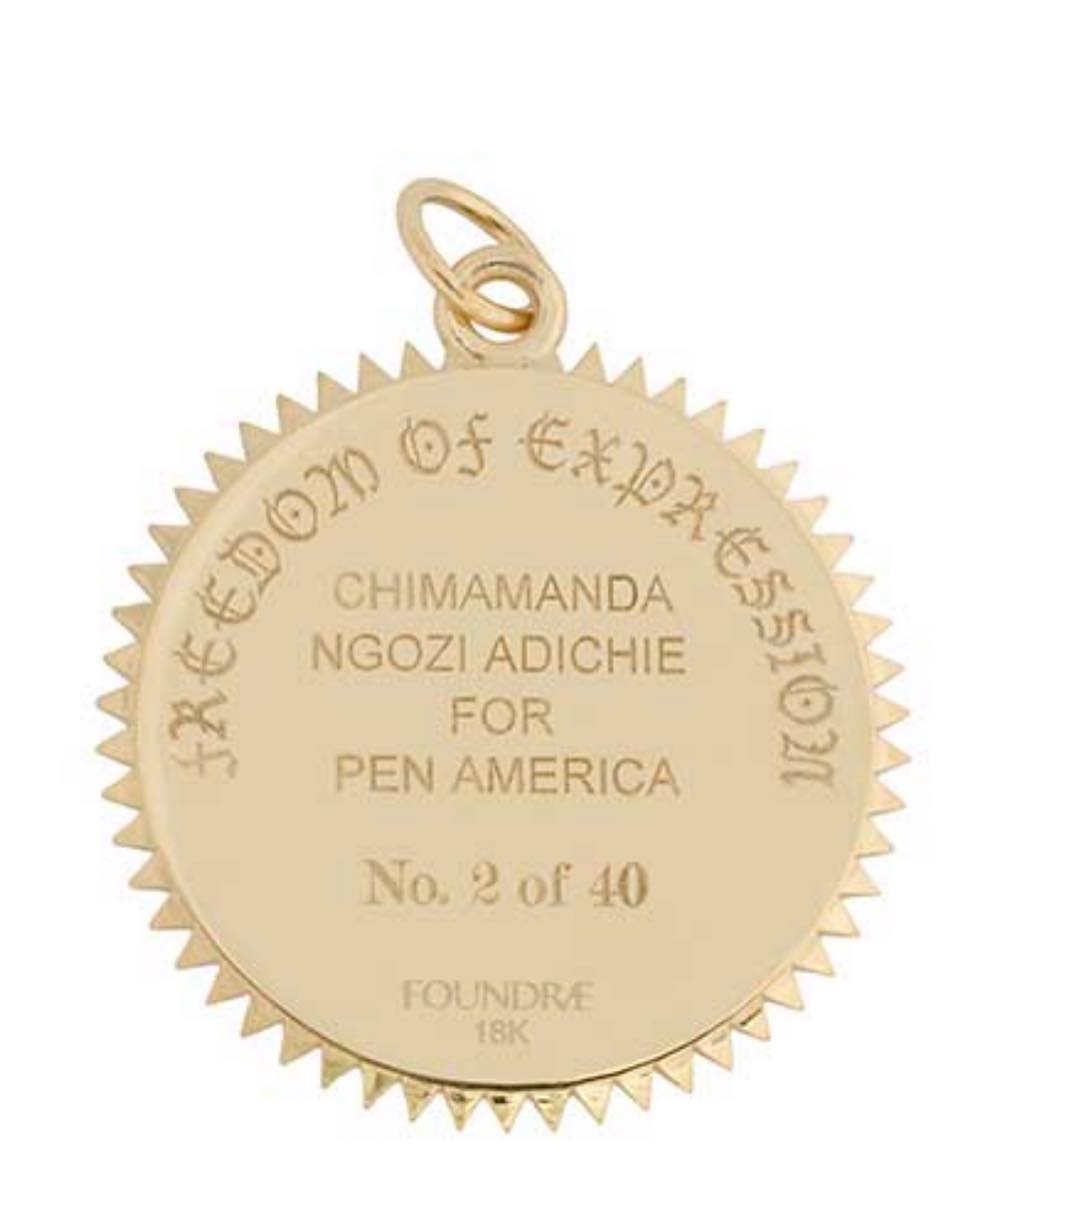 Chimamanda Adichie designs limited medallions  with a powerful meaning